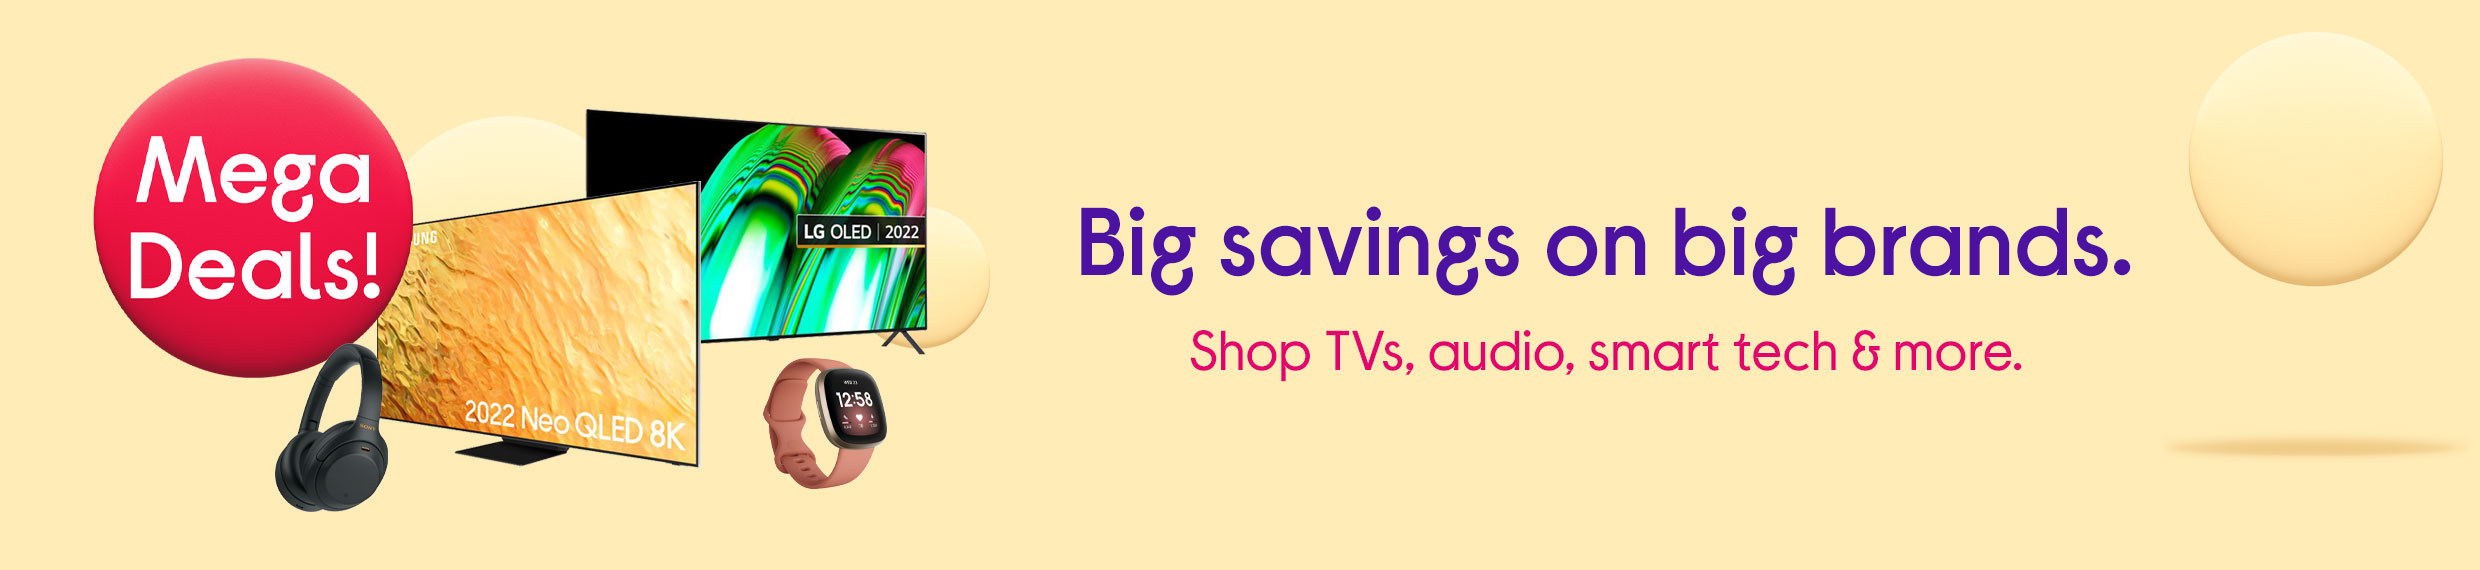 Mega Deals on TVs and Smart Tech at Currys